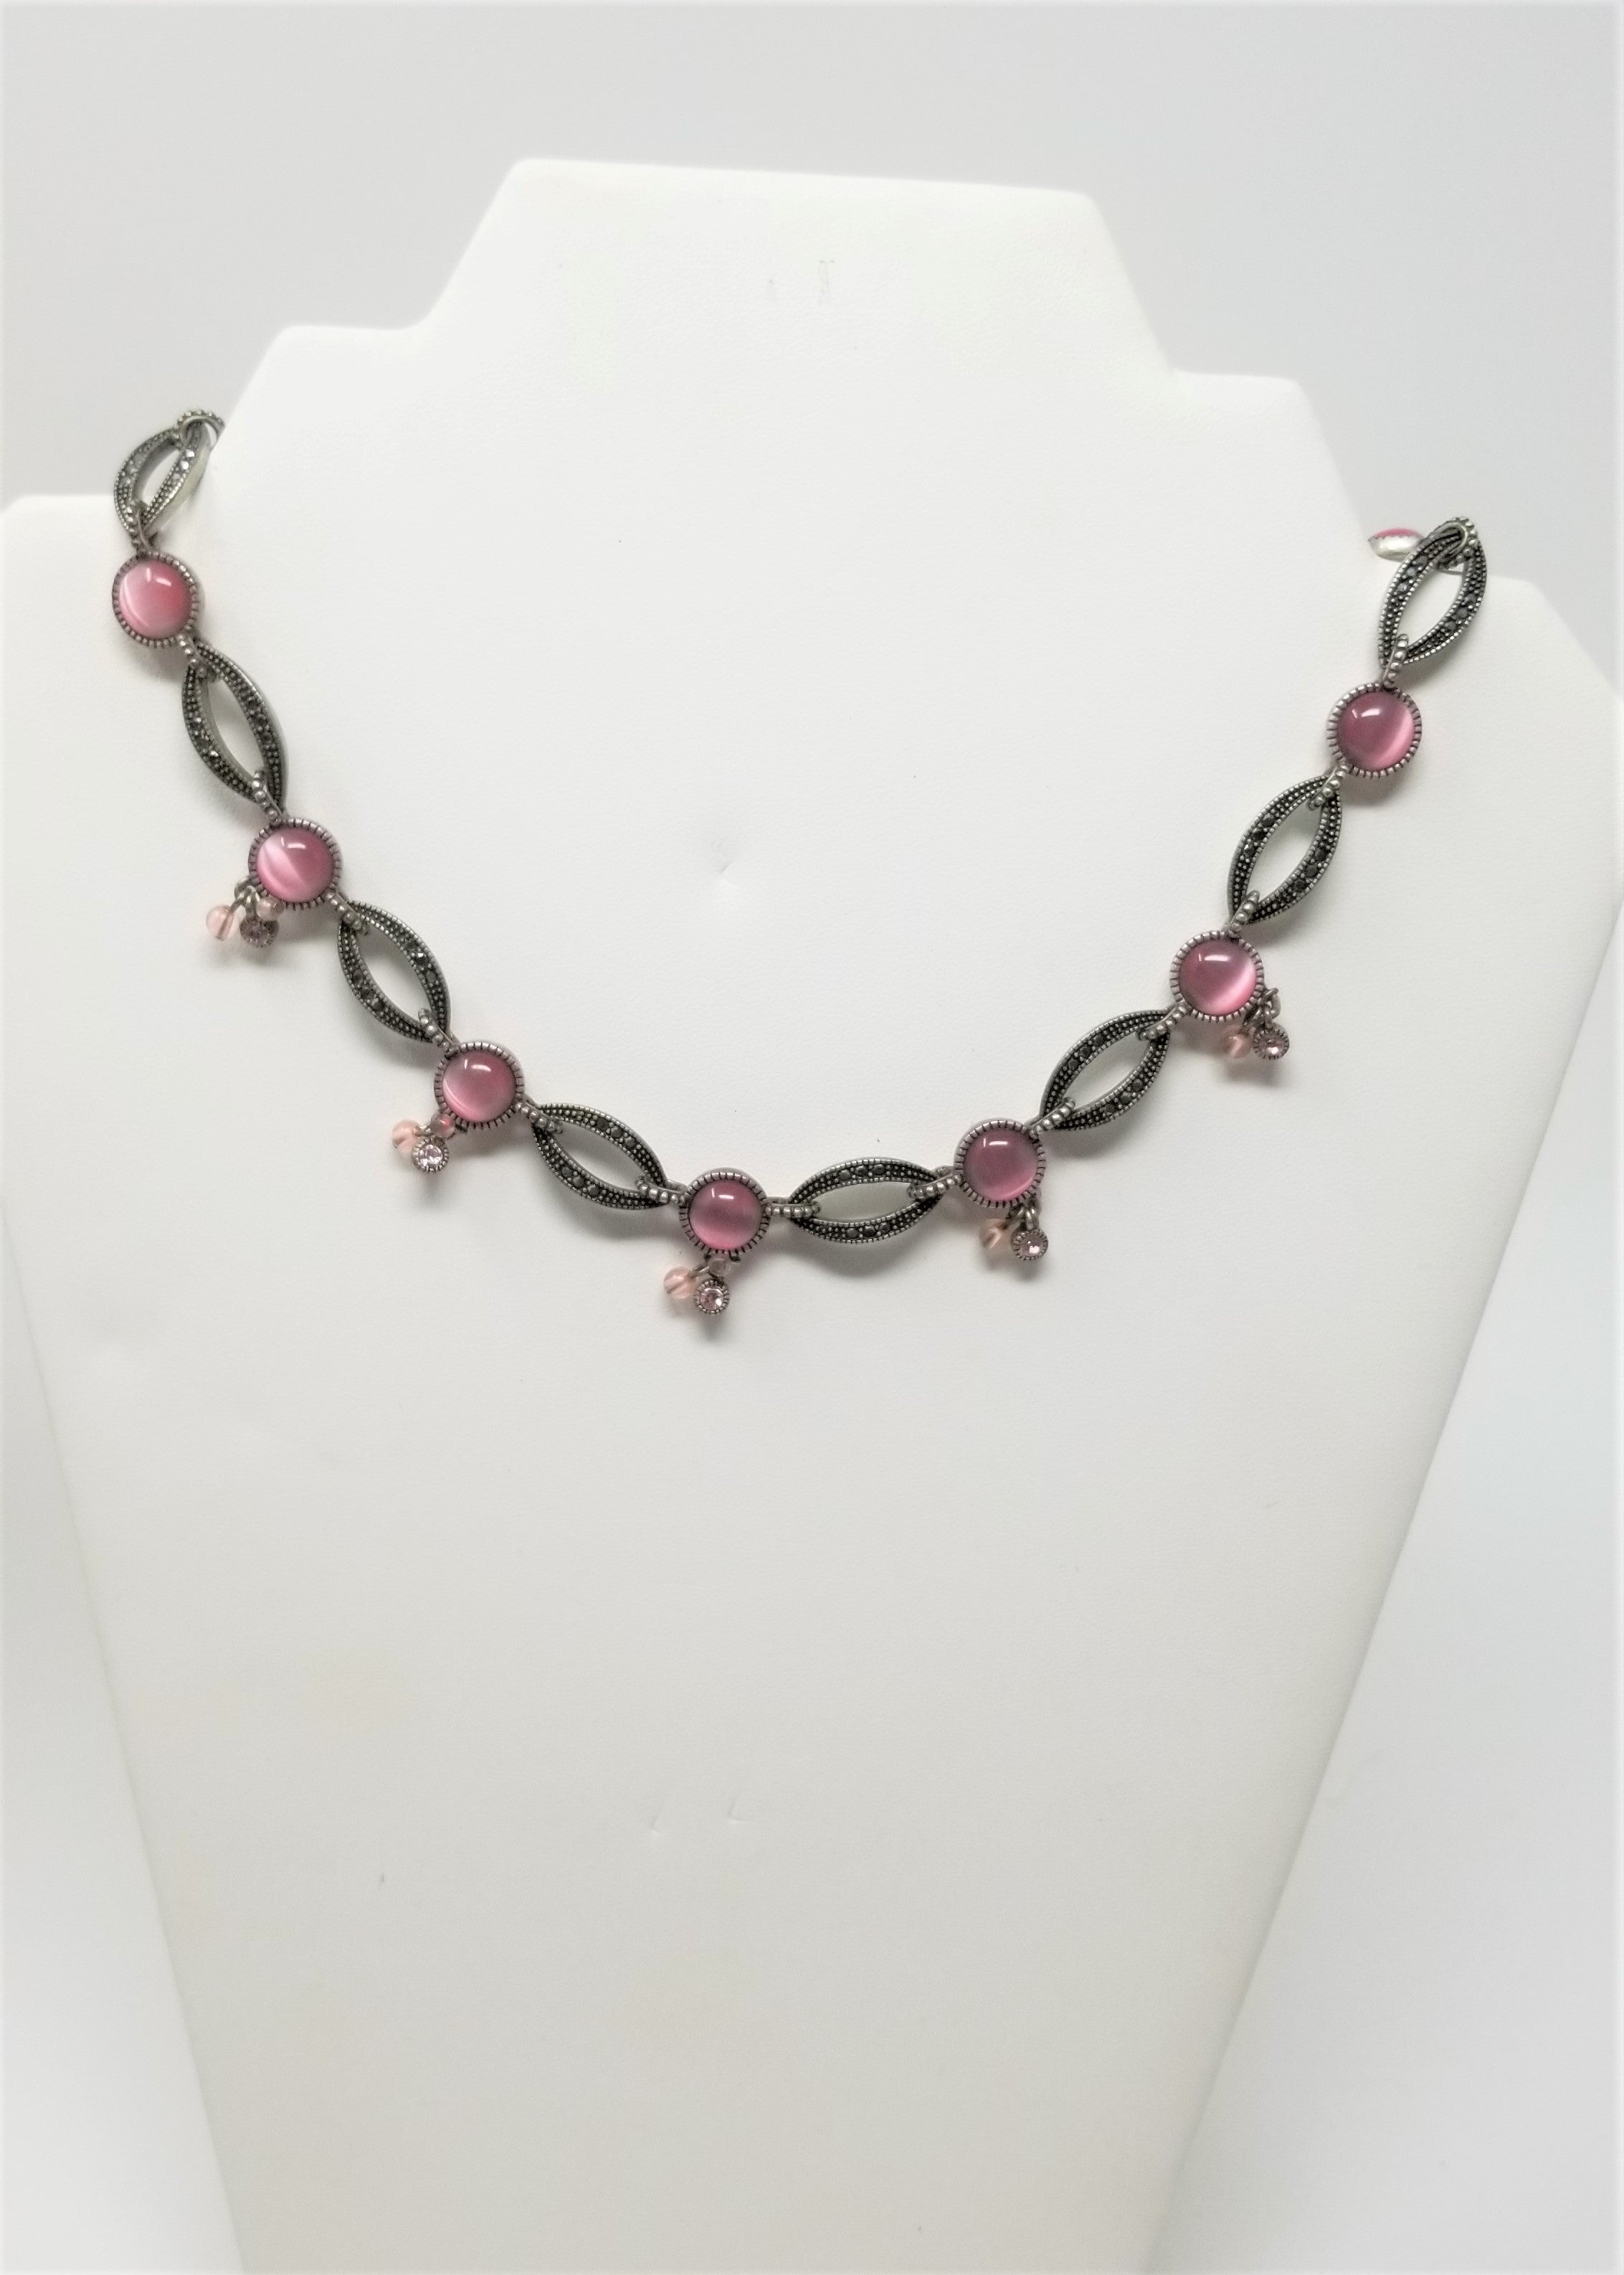 Antique Silver Pink Cats Eye & Marcasite Choker Necklace